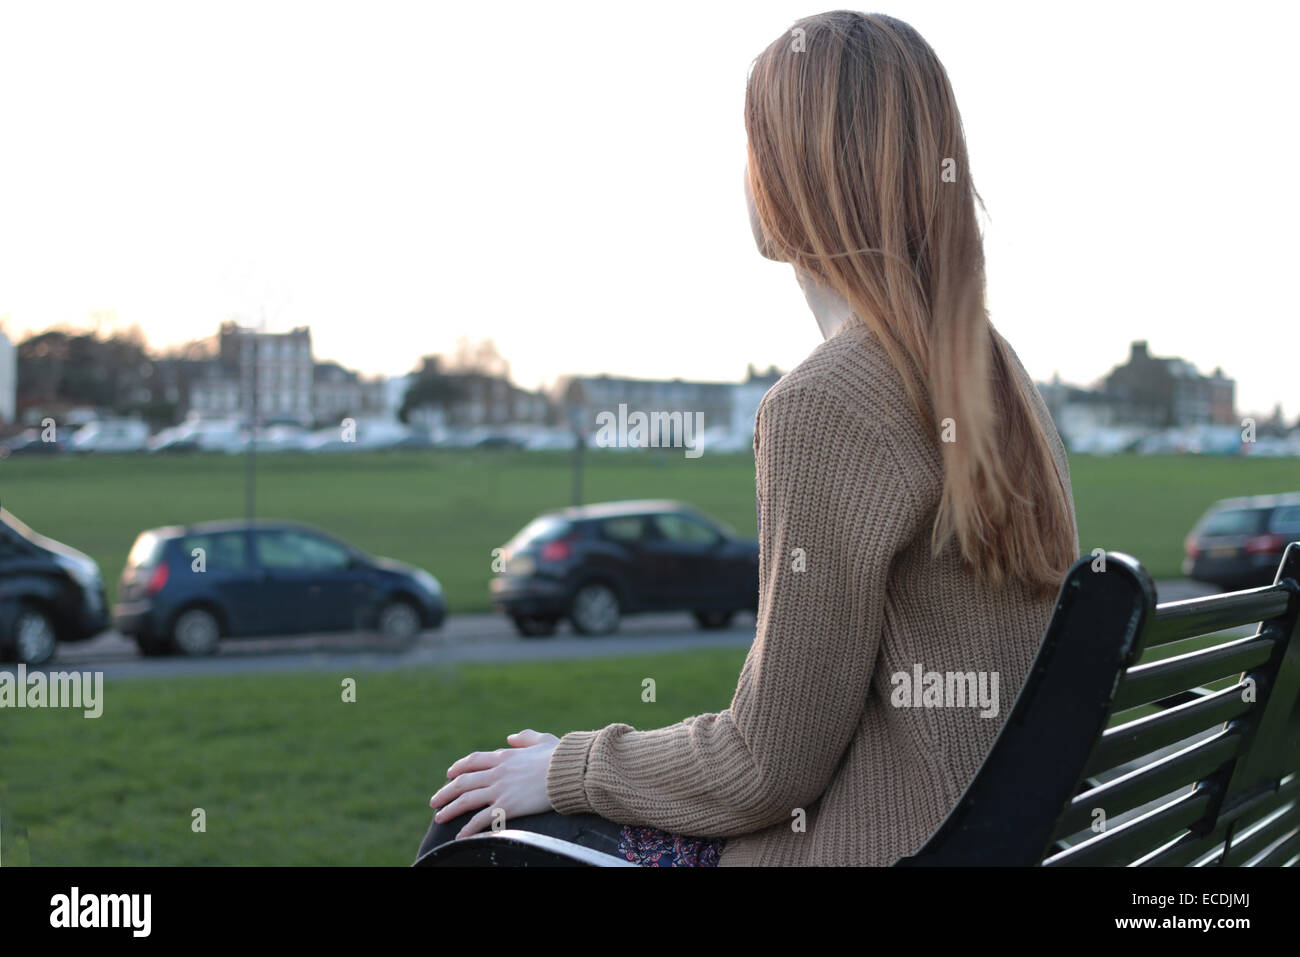 Rear view shot of a young woman sitting on a bench, looking into the distance in a park with cars parked. Stock Photo